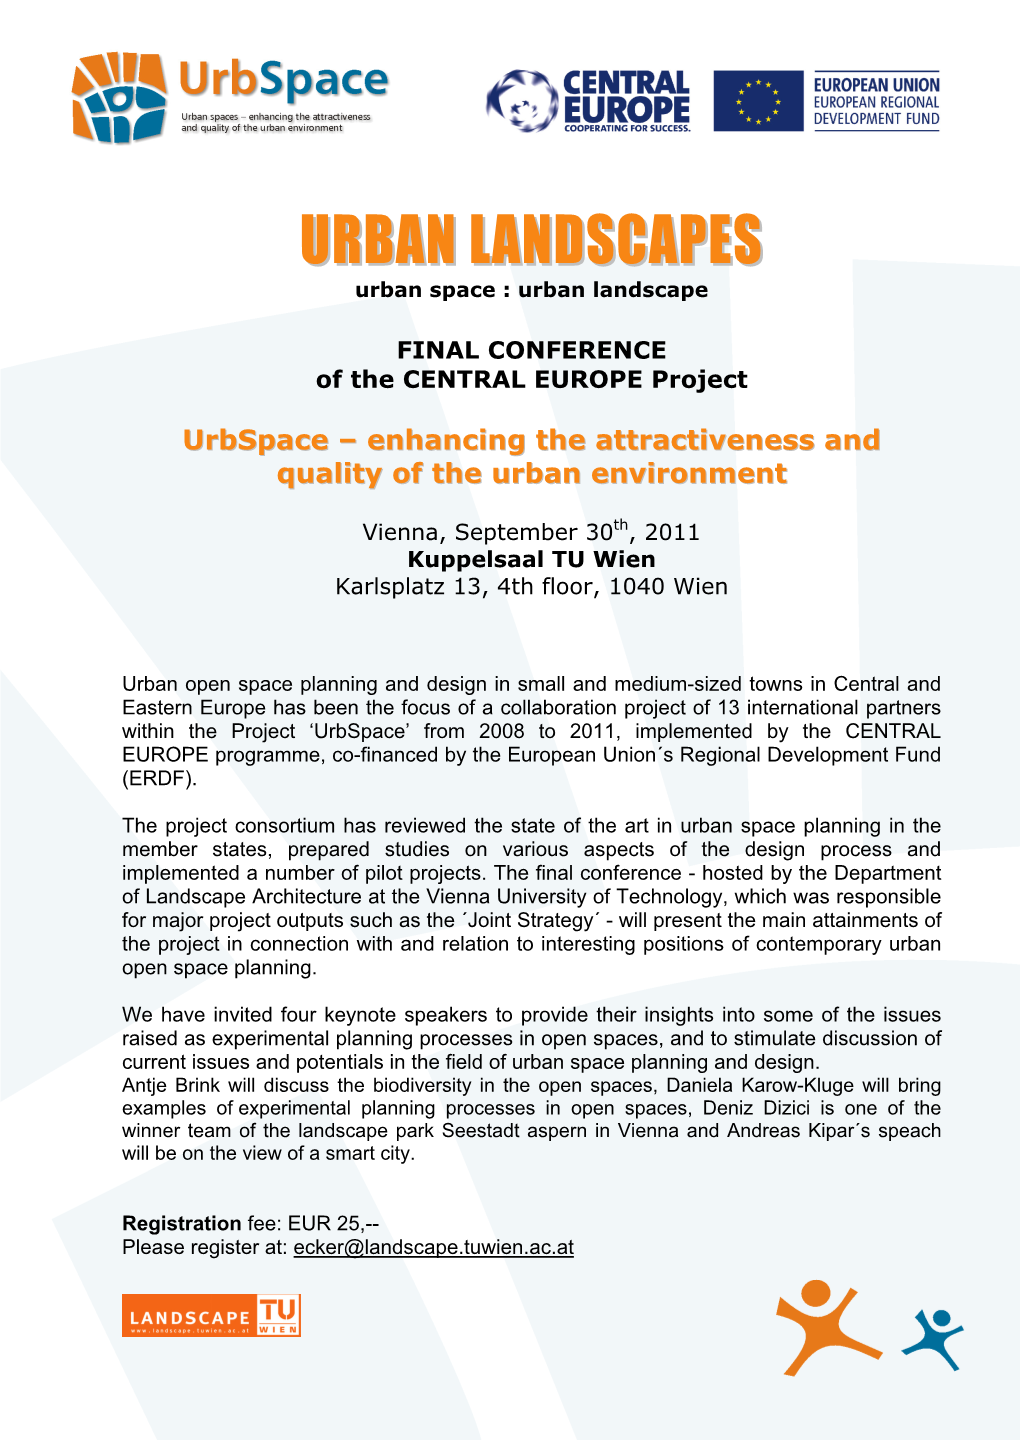 Urban Landscapes: Linking People and Place” Round Table Discussion with Key Note Speakers and Project Partners Moderation: Richard Stiles (Vienna)